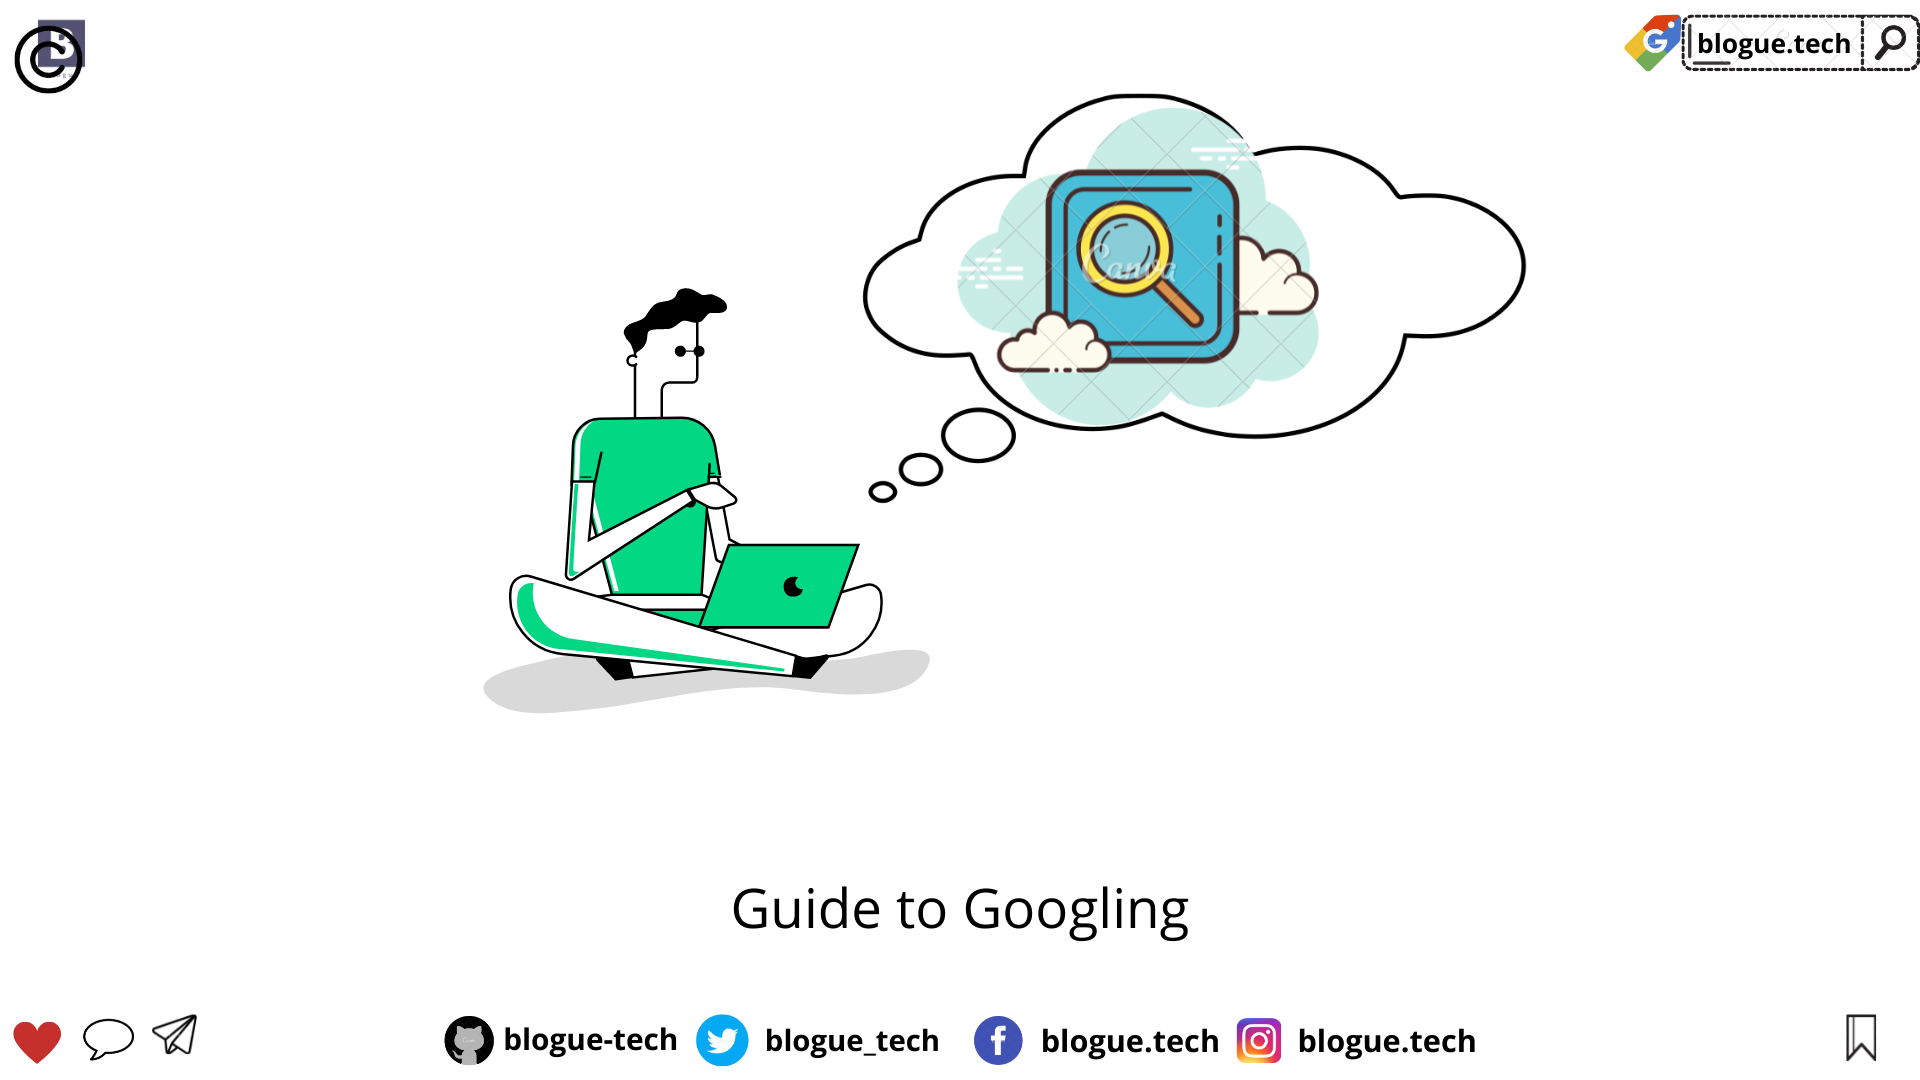 Guide to Googling